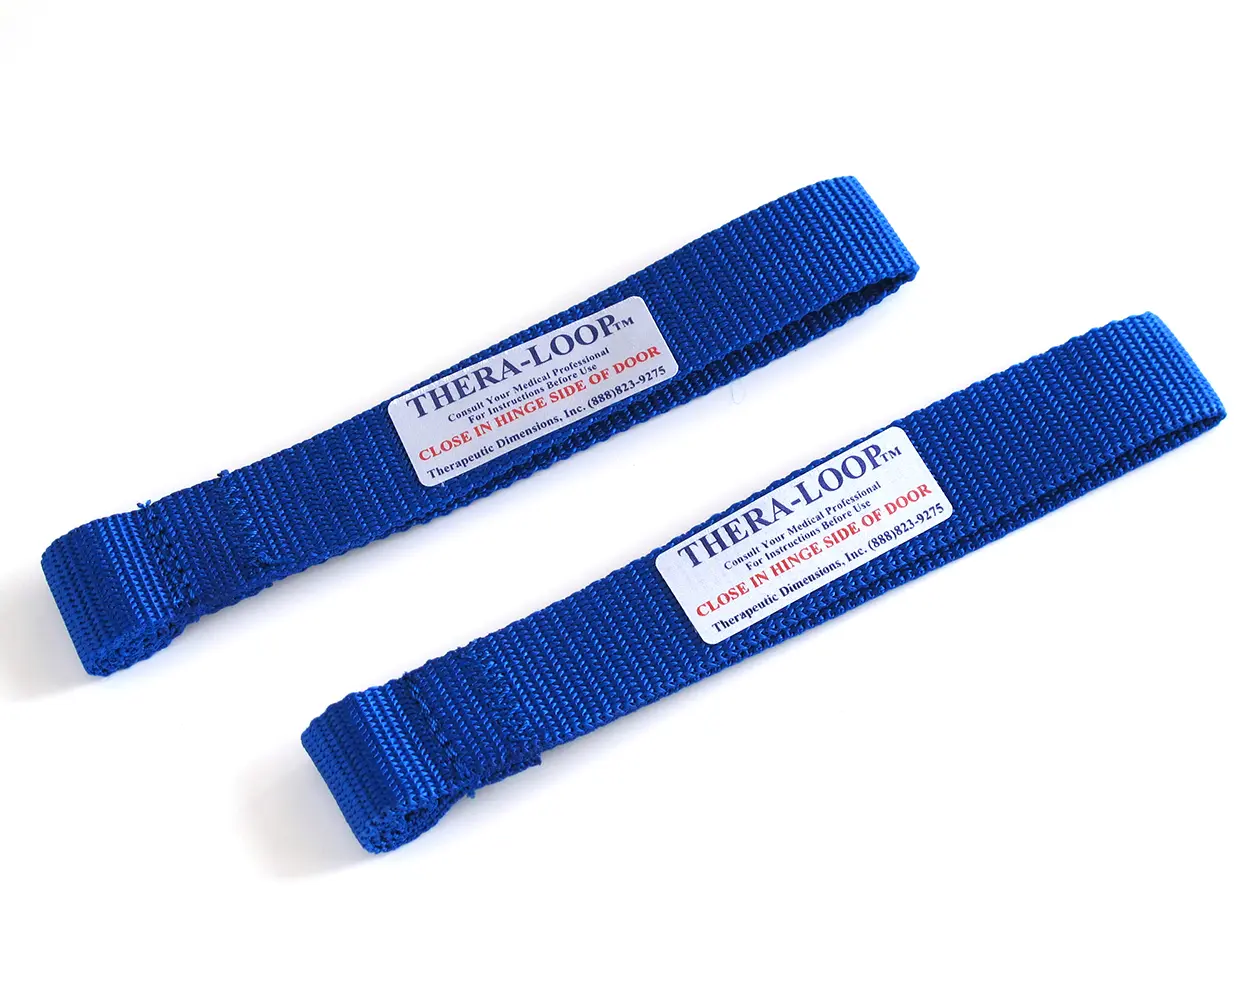 Range-Master Stretch-Strap :: anchor and position feet or hands